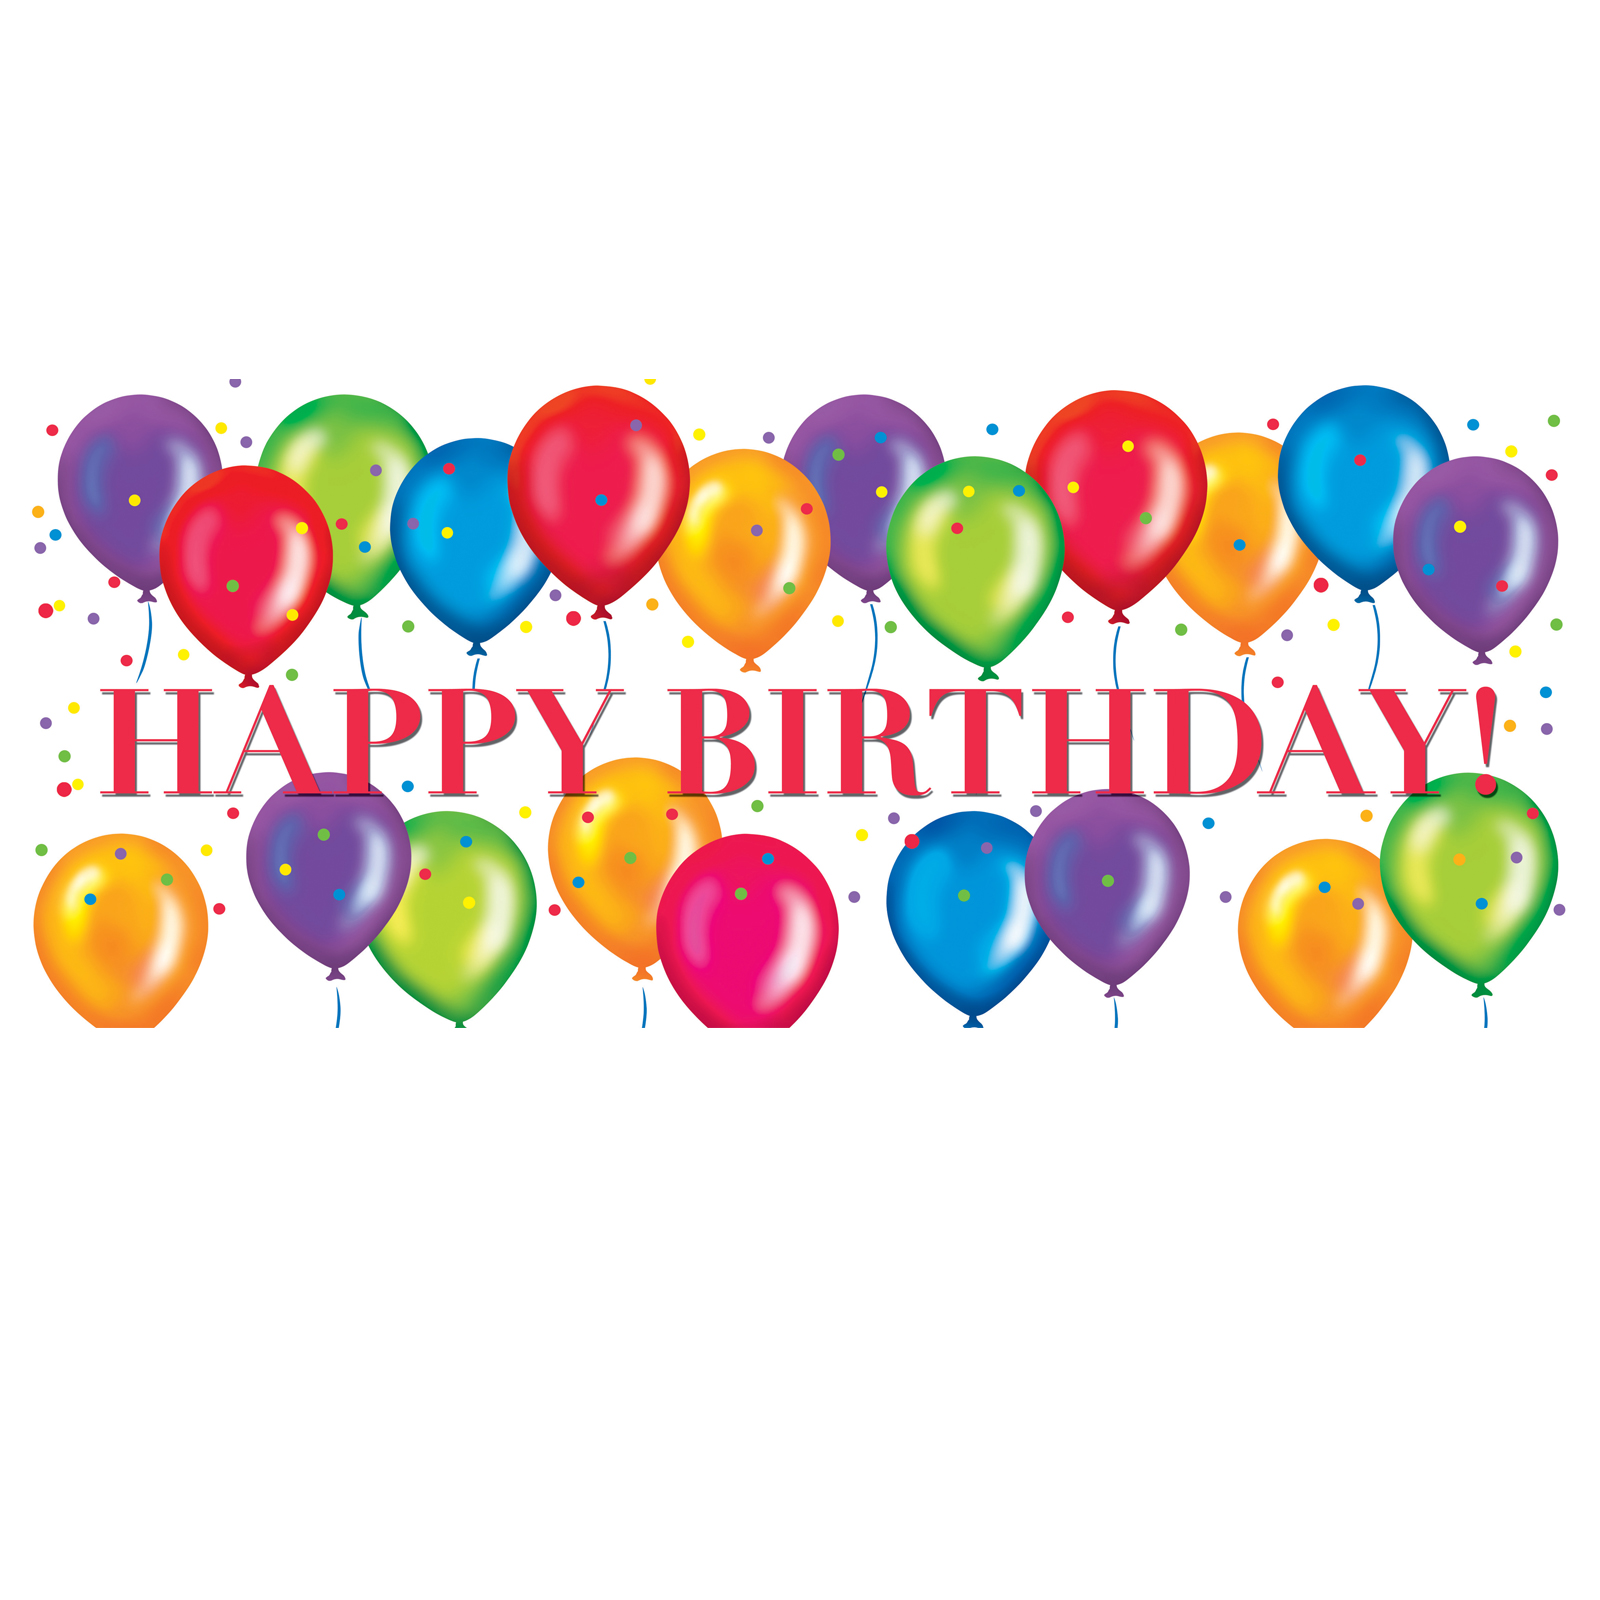 Happy birthday free clipart images